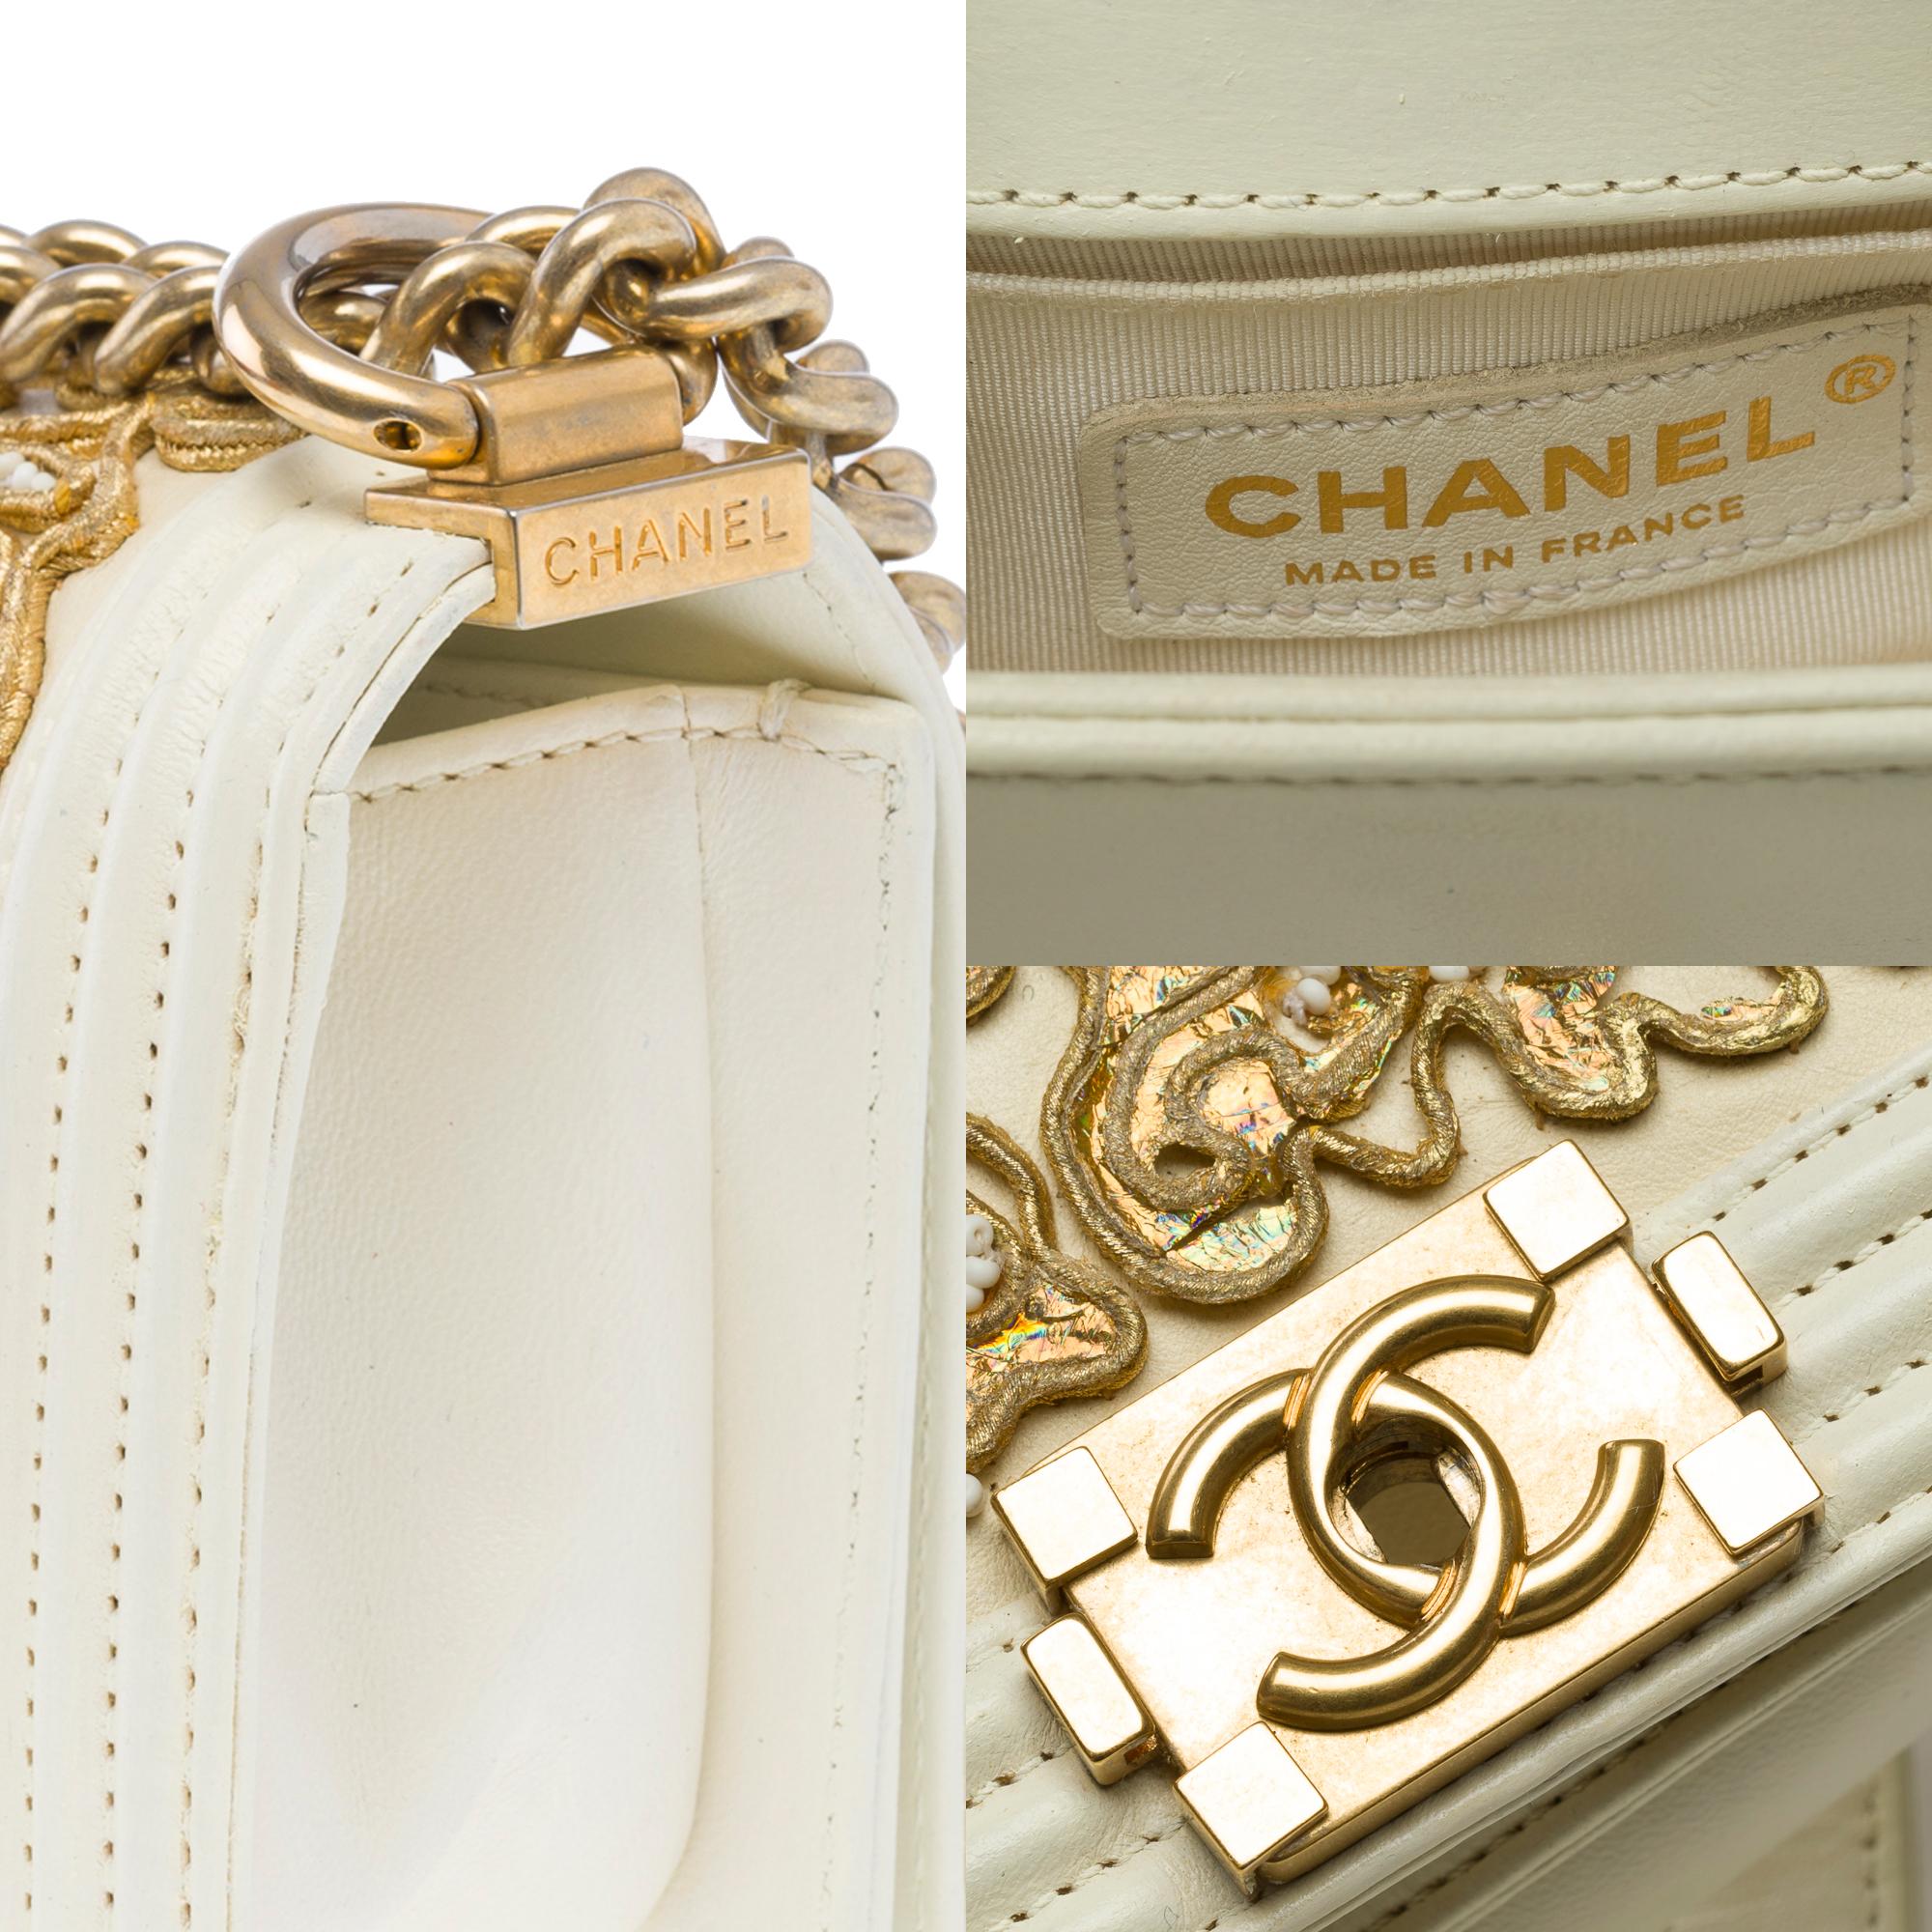 Limited edition Chanel Boy Mini Versailles shoulder bag in ecru leather, MGHW For Sale 2